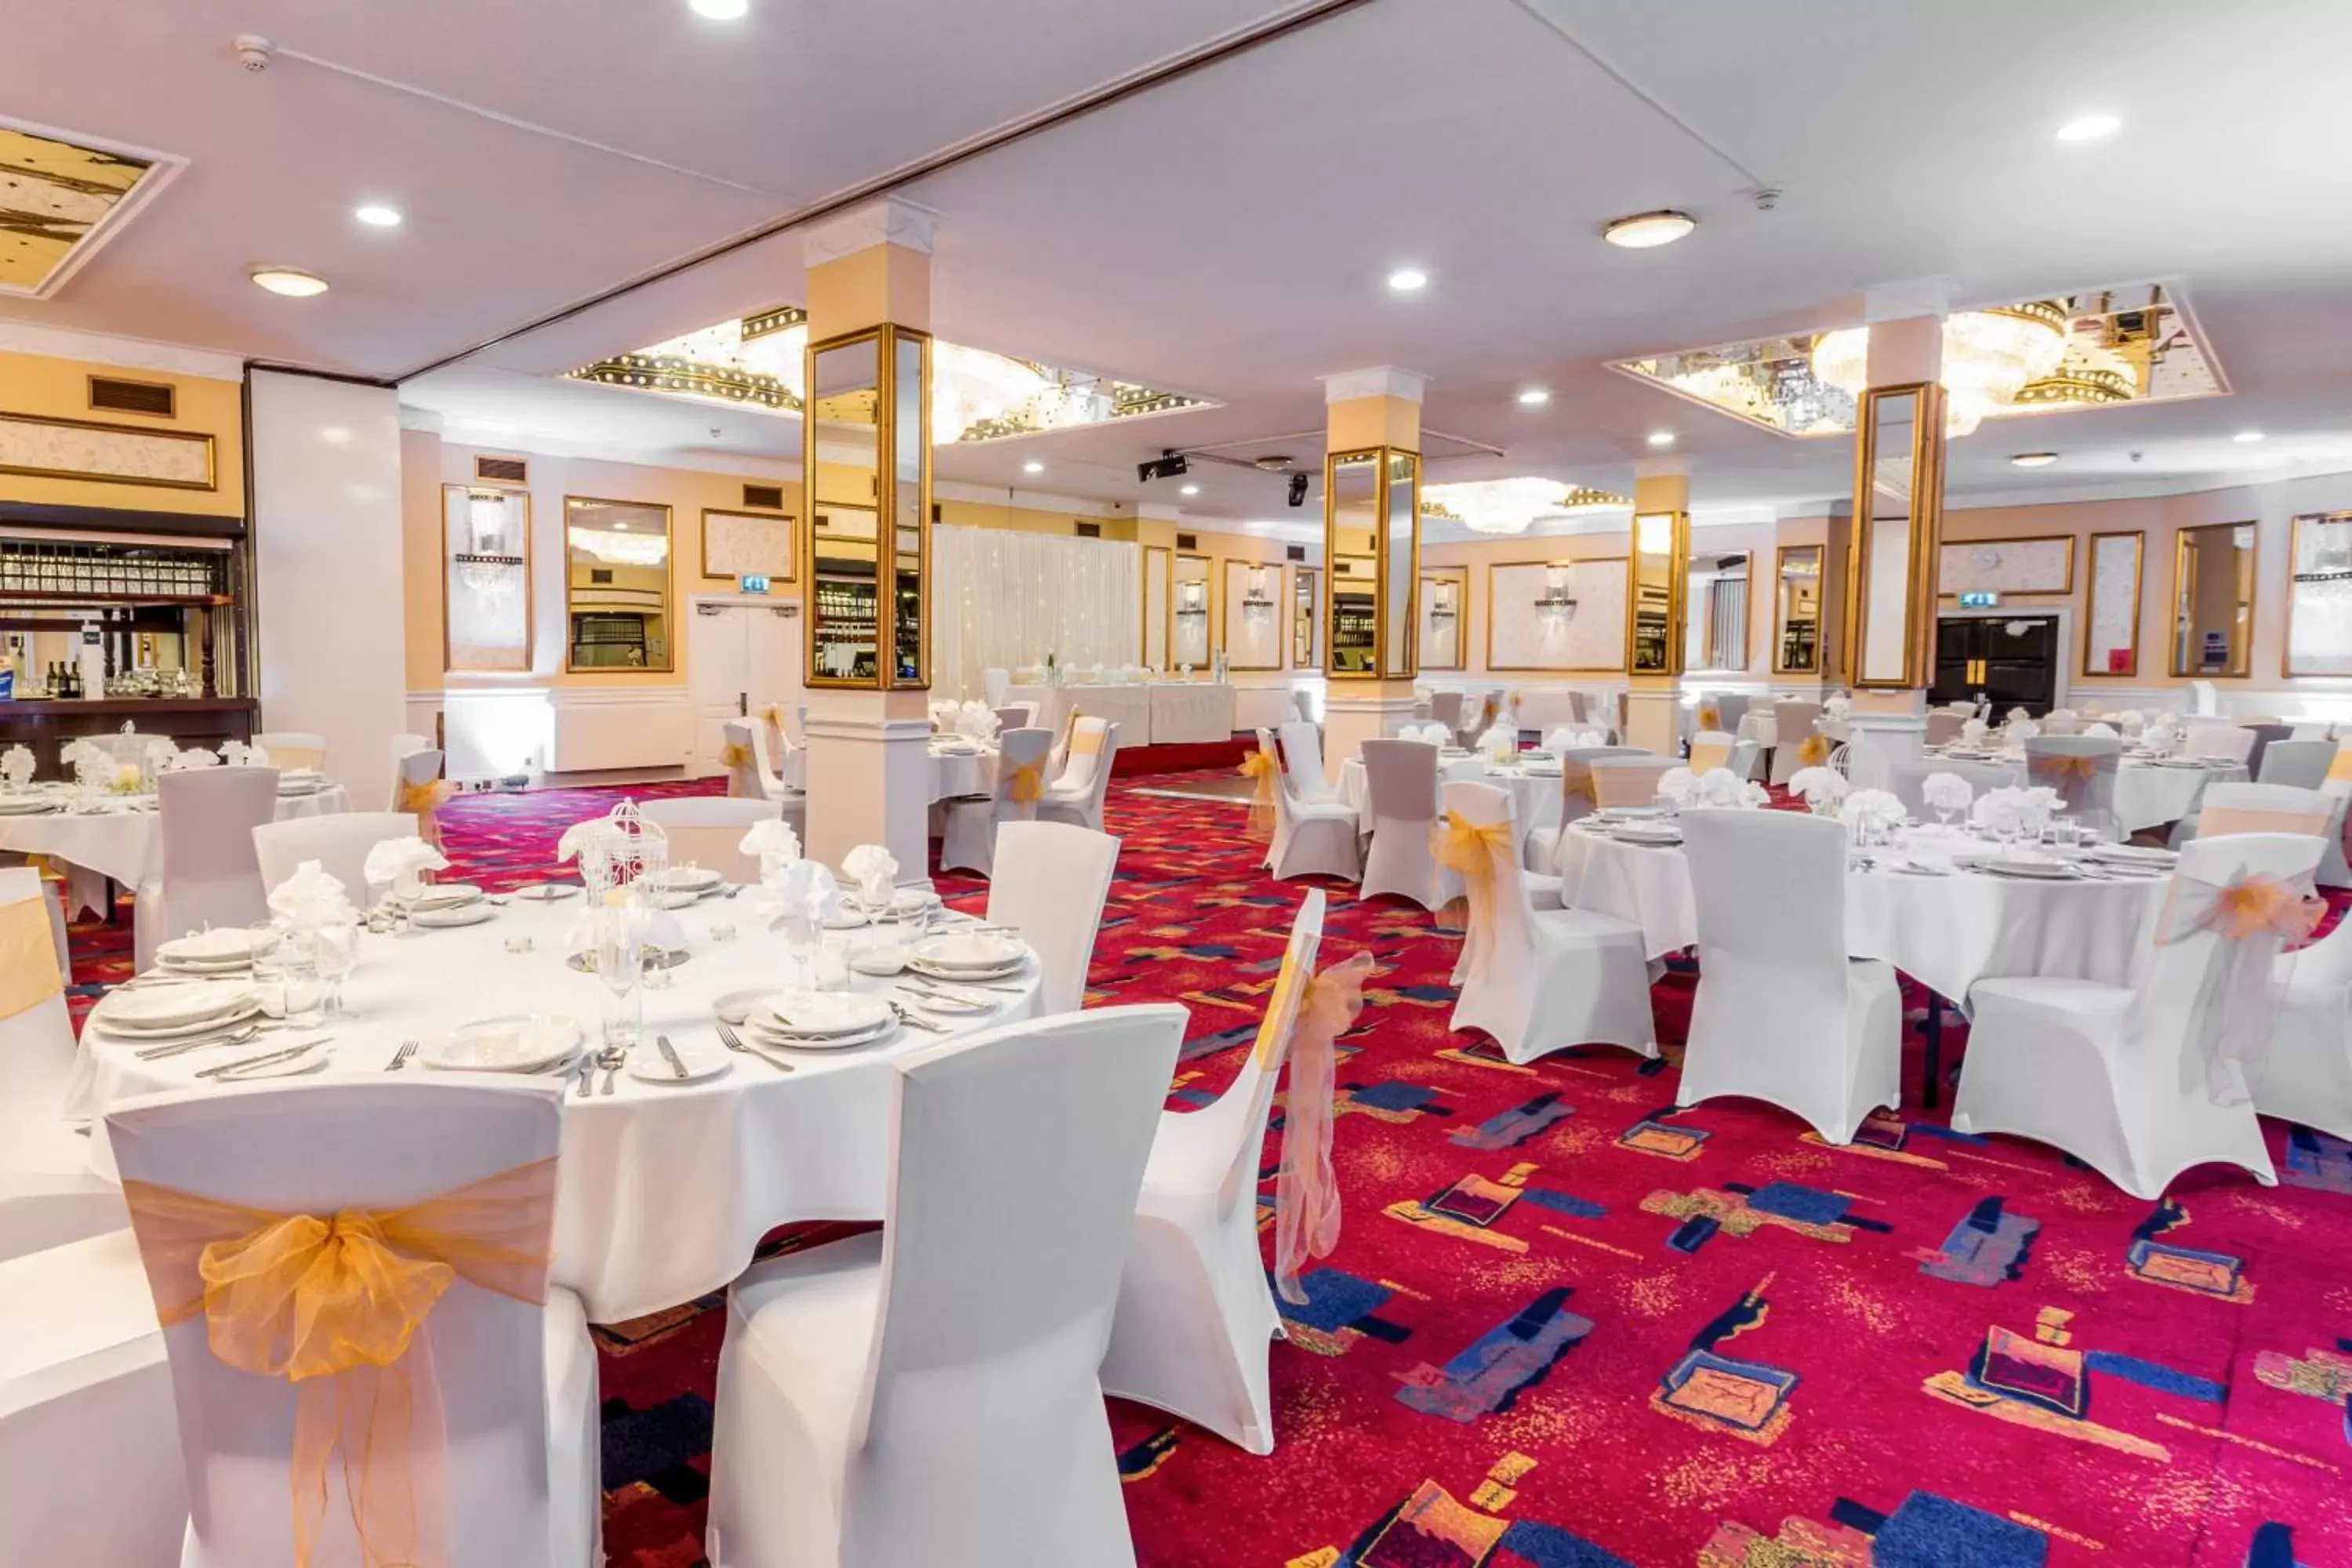 Banquet/Function facilities, Banquet Facilities in Sachas Hotel Manchester